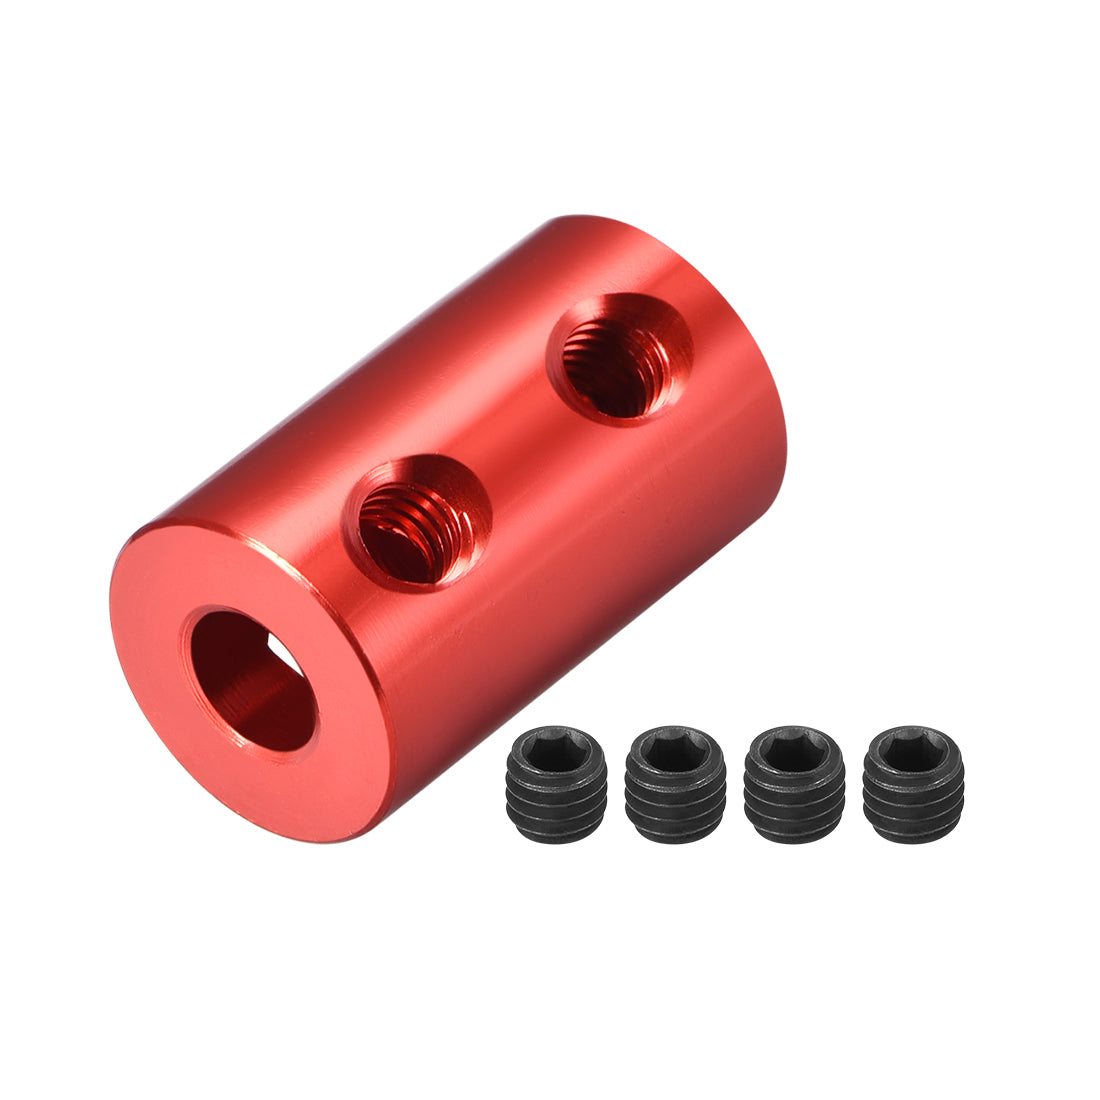 uxcell Uxcell Shaft Coupling 3.17mm to 5mm Bore L20xD12 Robot Motor Wheel Rigid Coupler Red